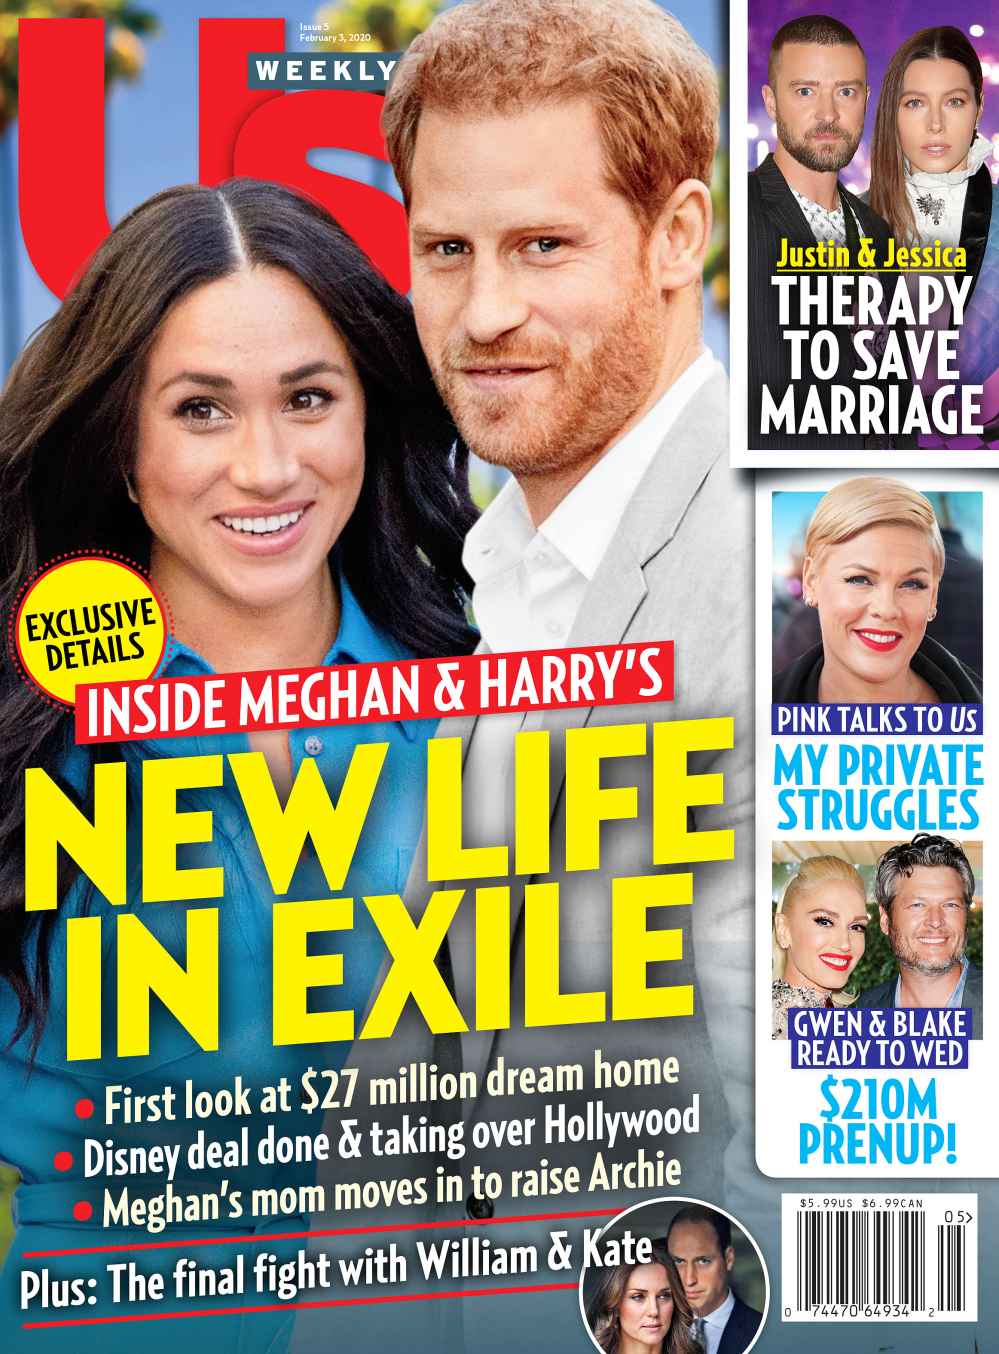 Us Weekly Cover Issue 0520 Meghan Markle and Prince Harry New Life in Exile